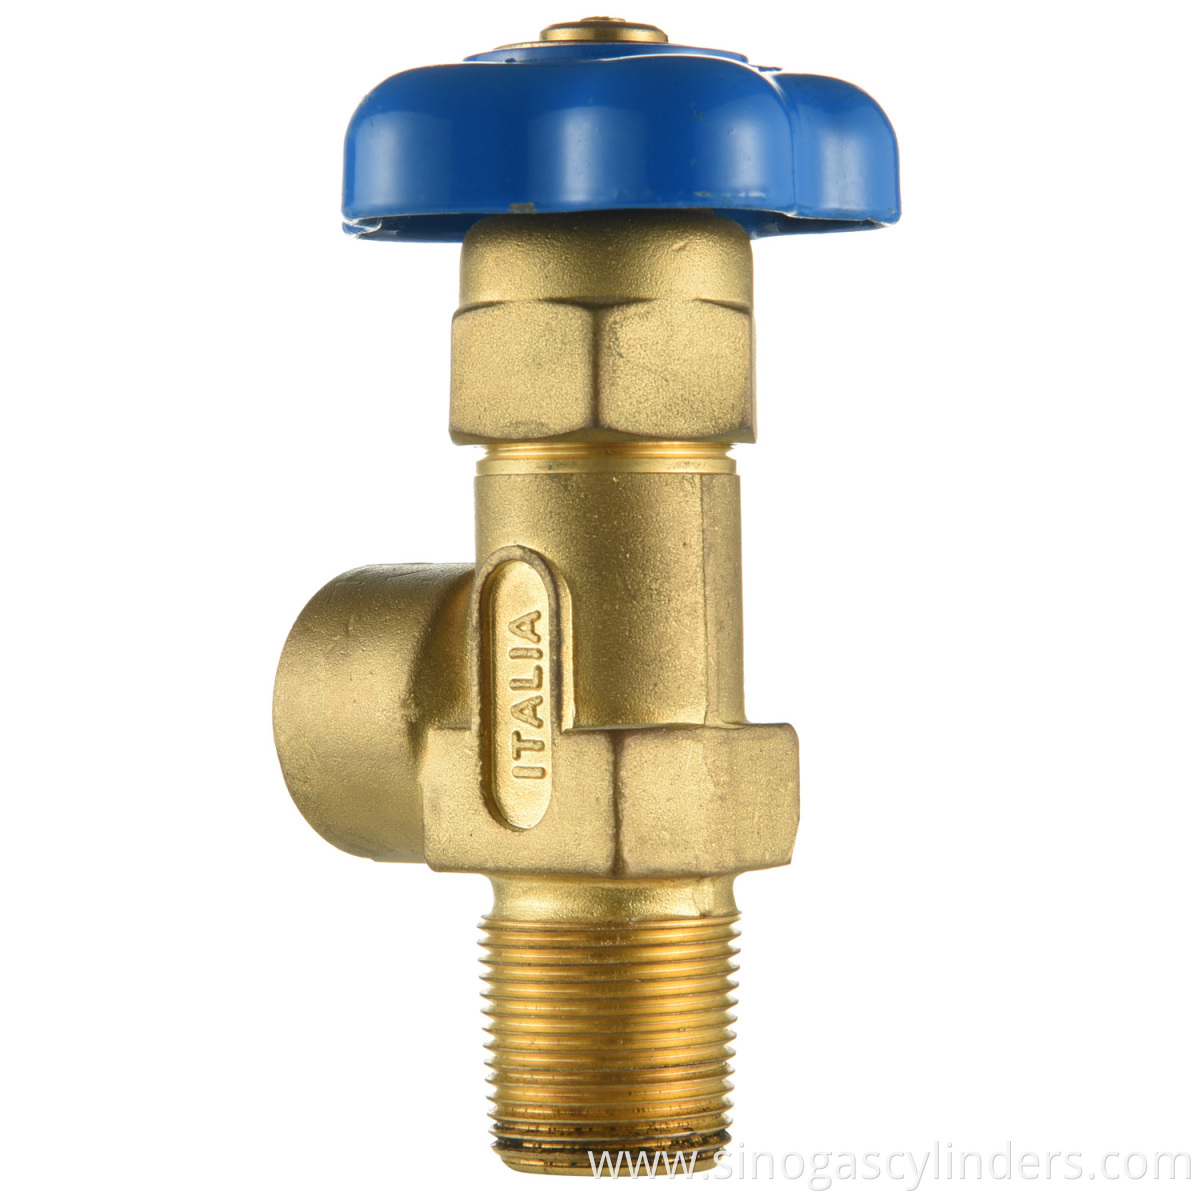 valves for gas cylinders